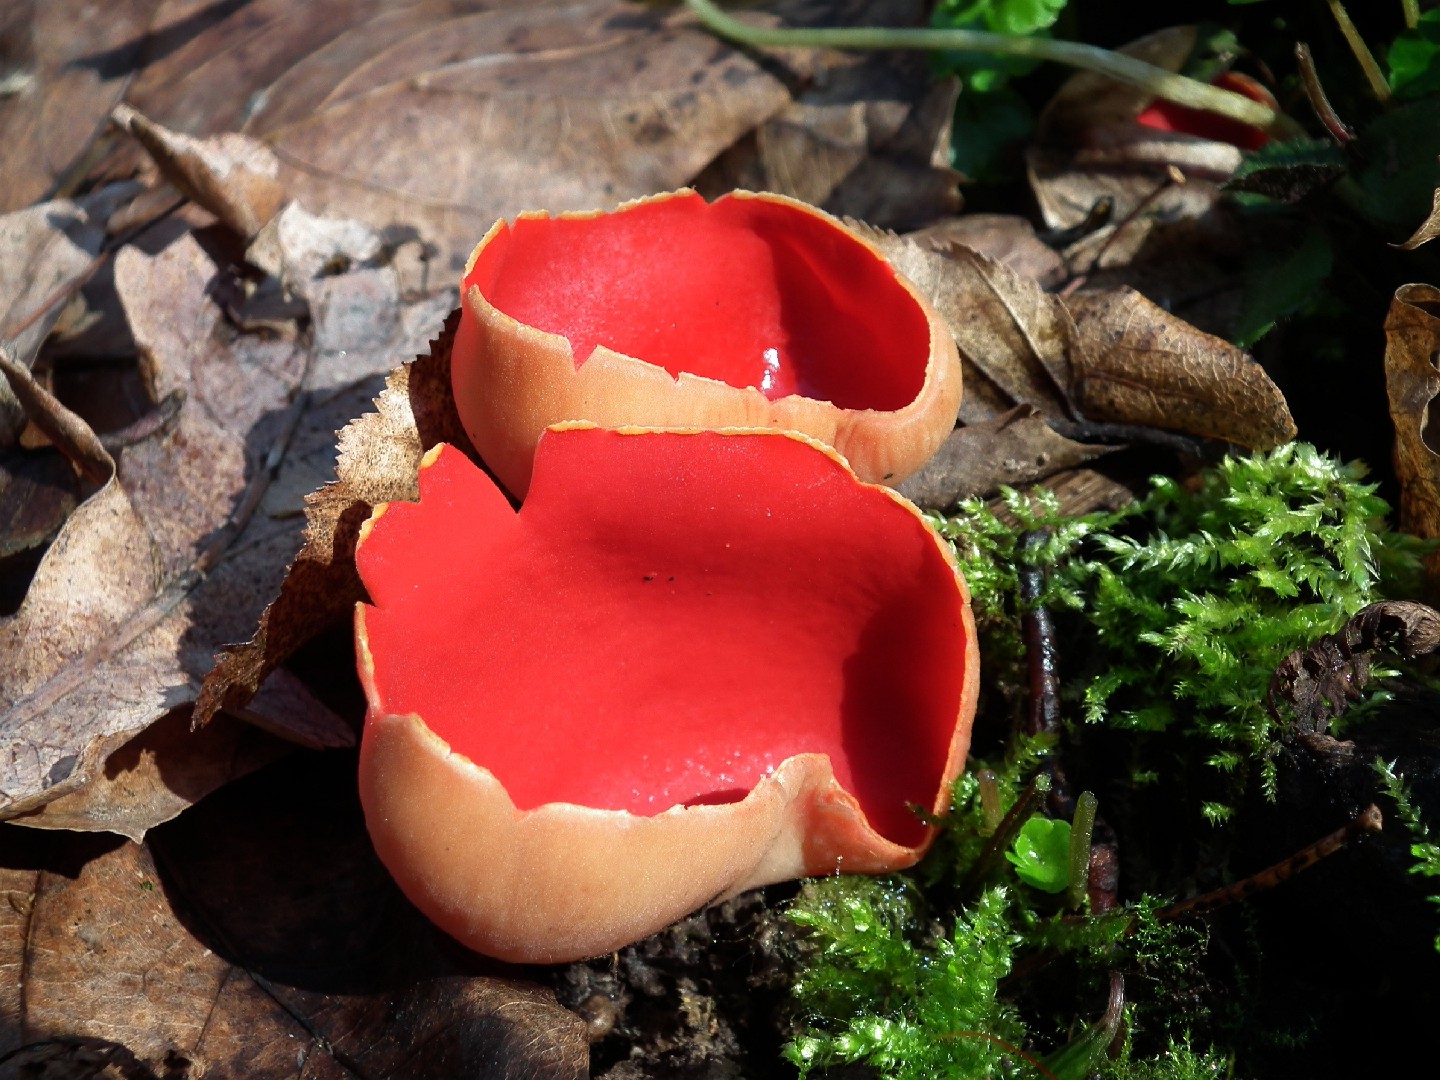 Scarlet cup (Sarcoscypha coccinea)